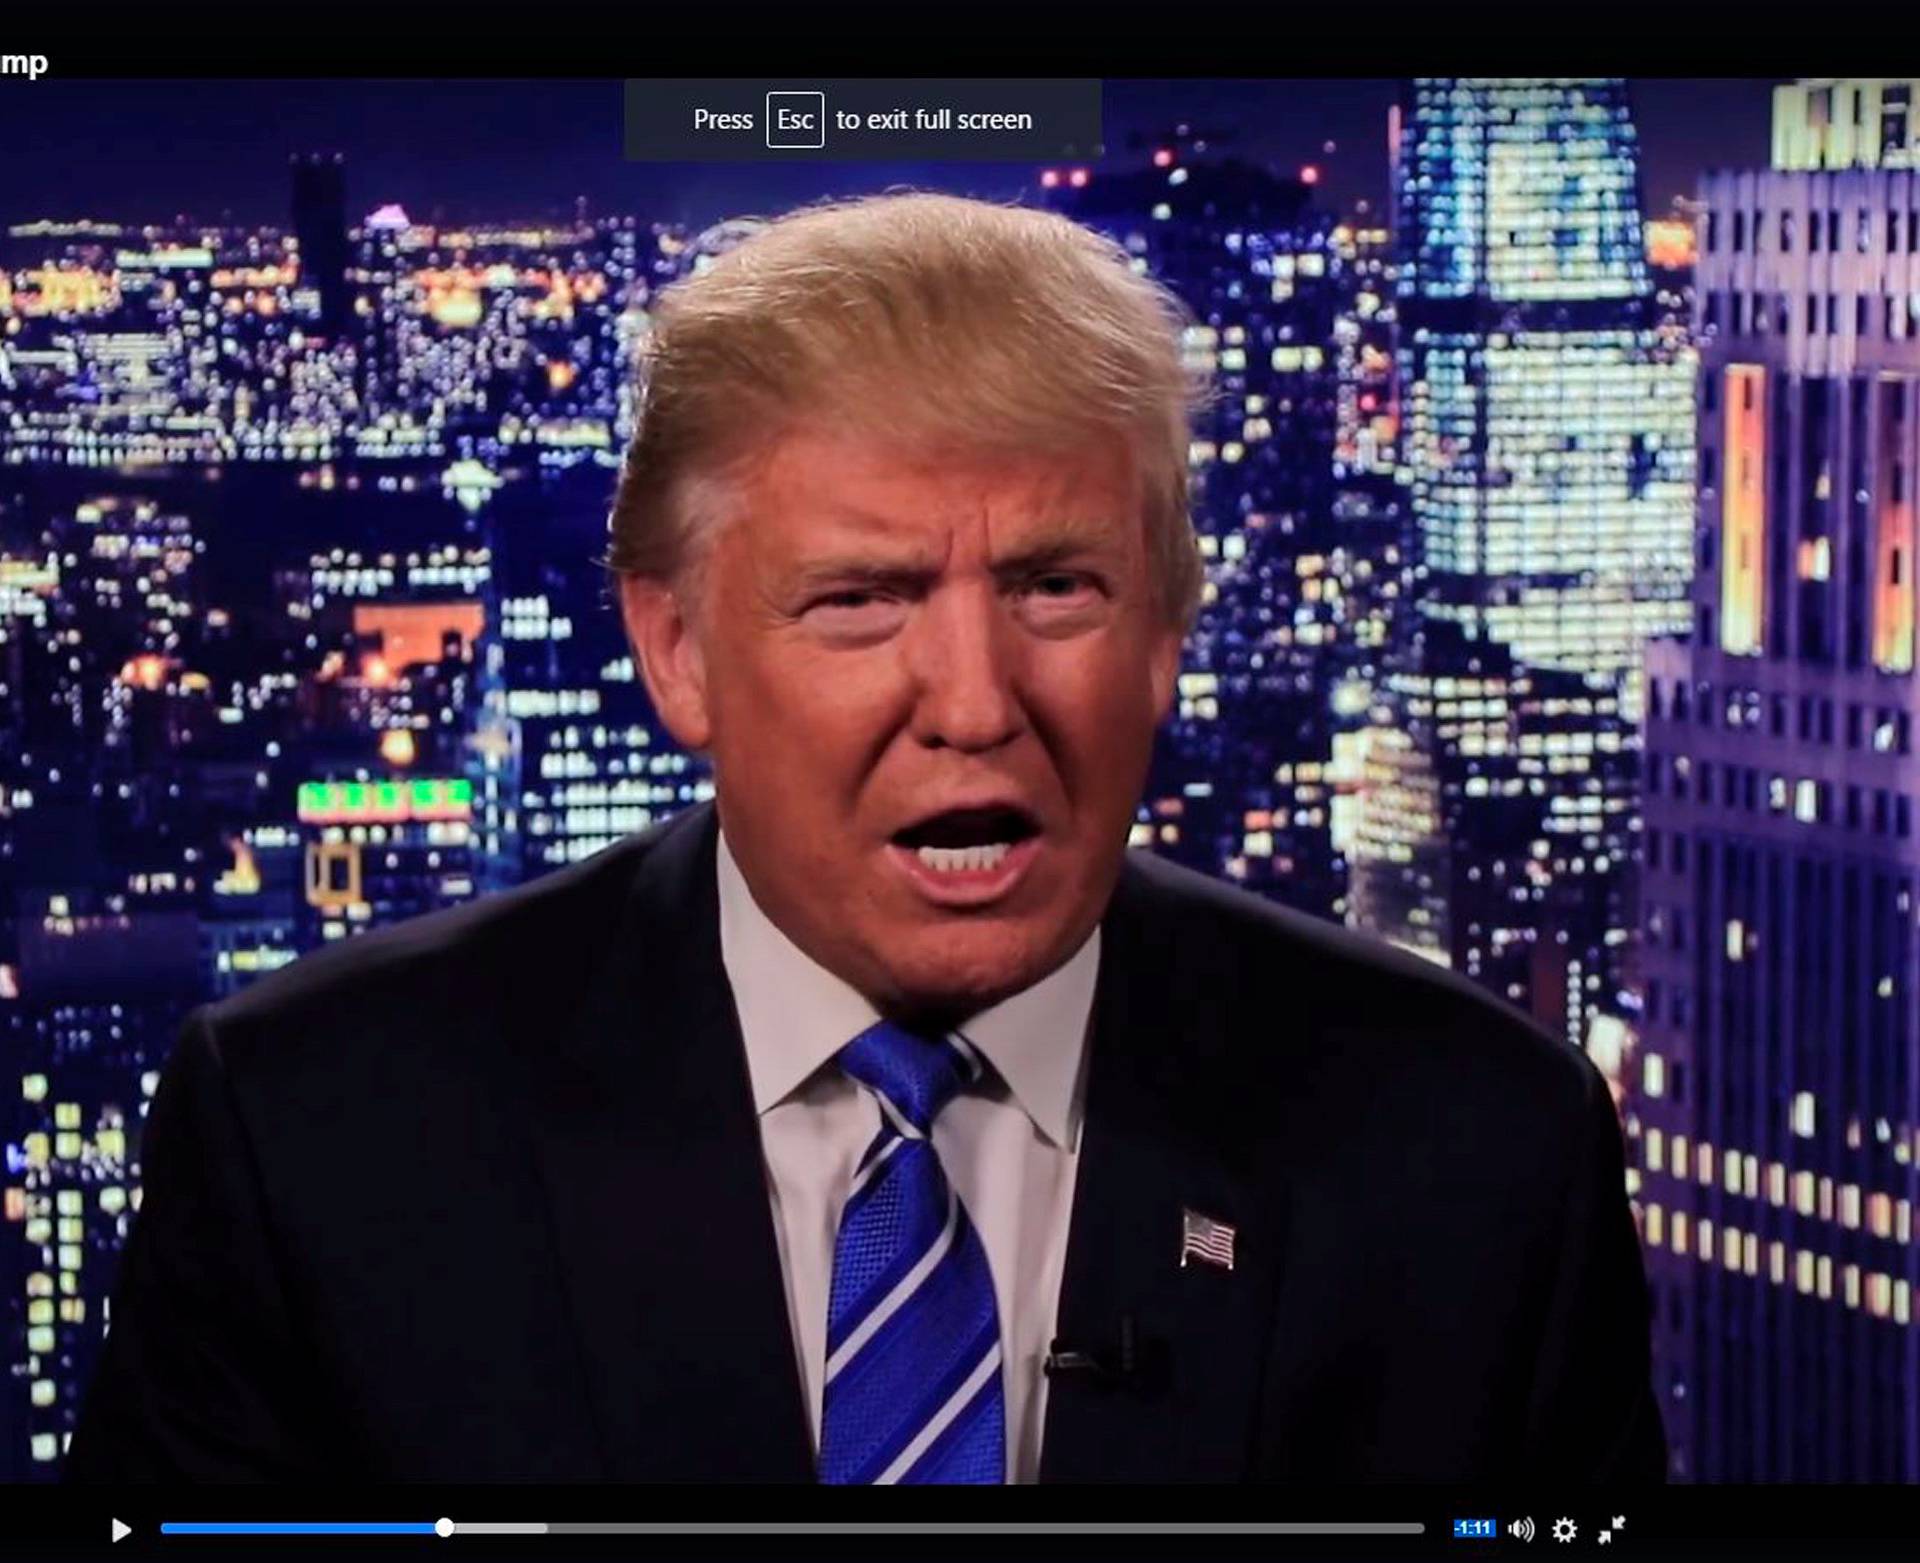 Republican U.S. presidential nominee Trump is seen in a video screengrab as he apologizes for lewd comments he made about women during a statement released via social media 